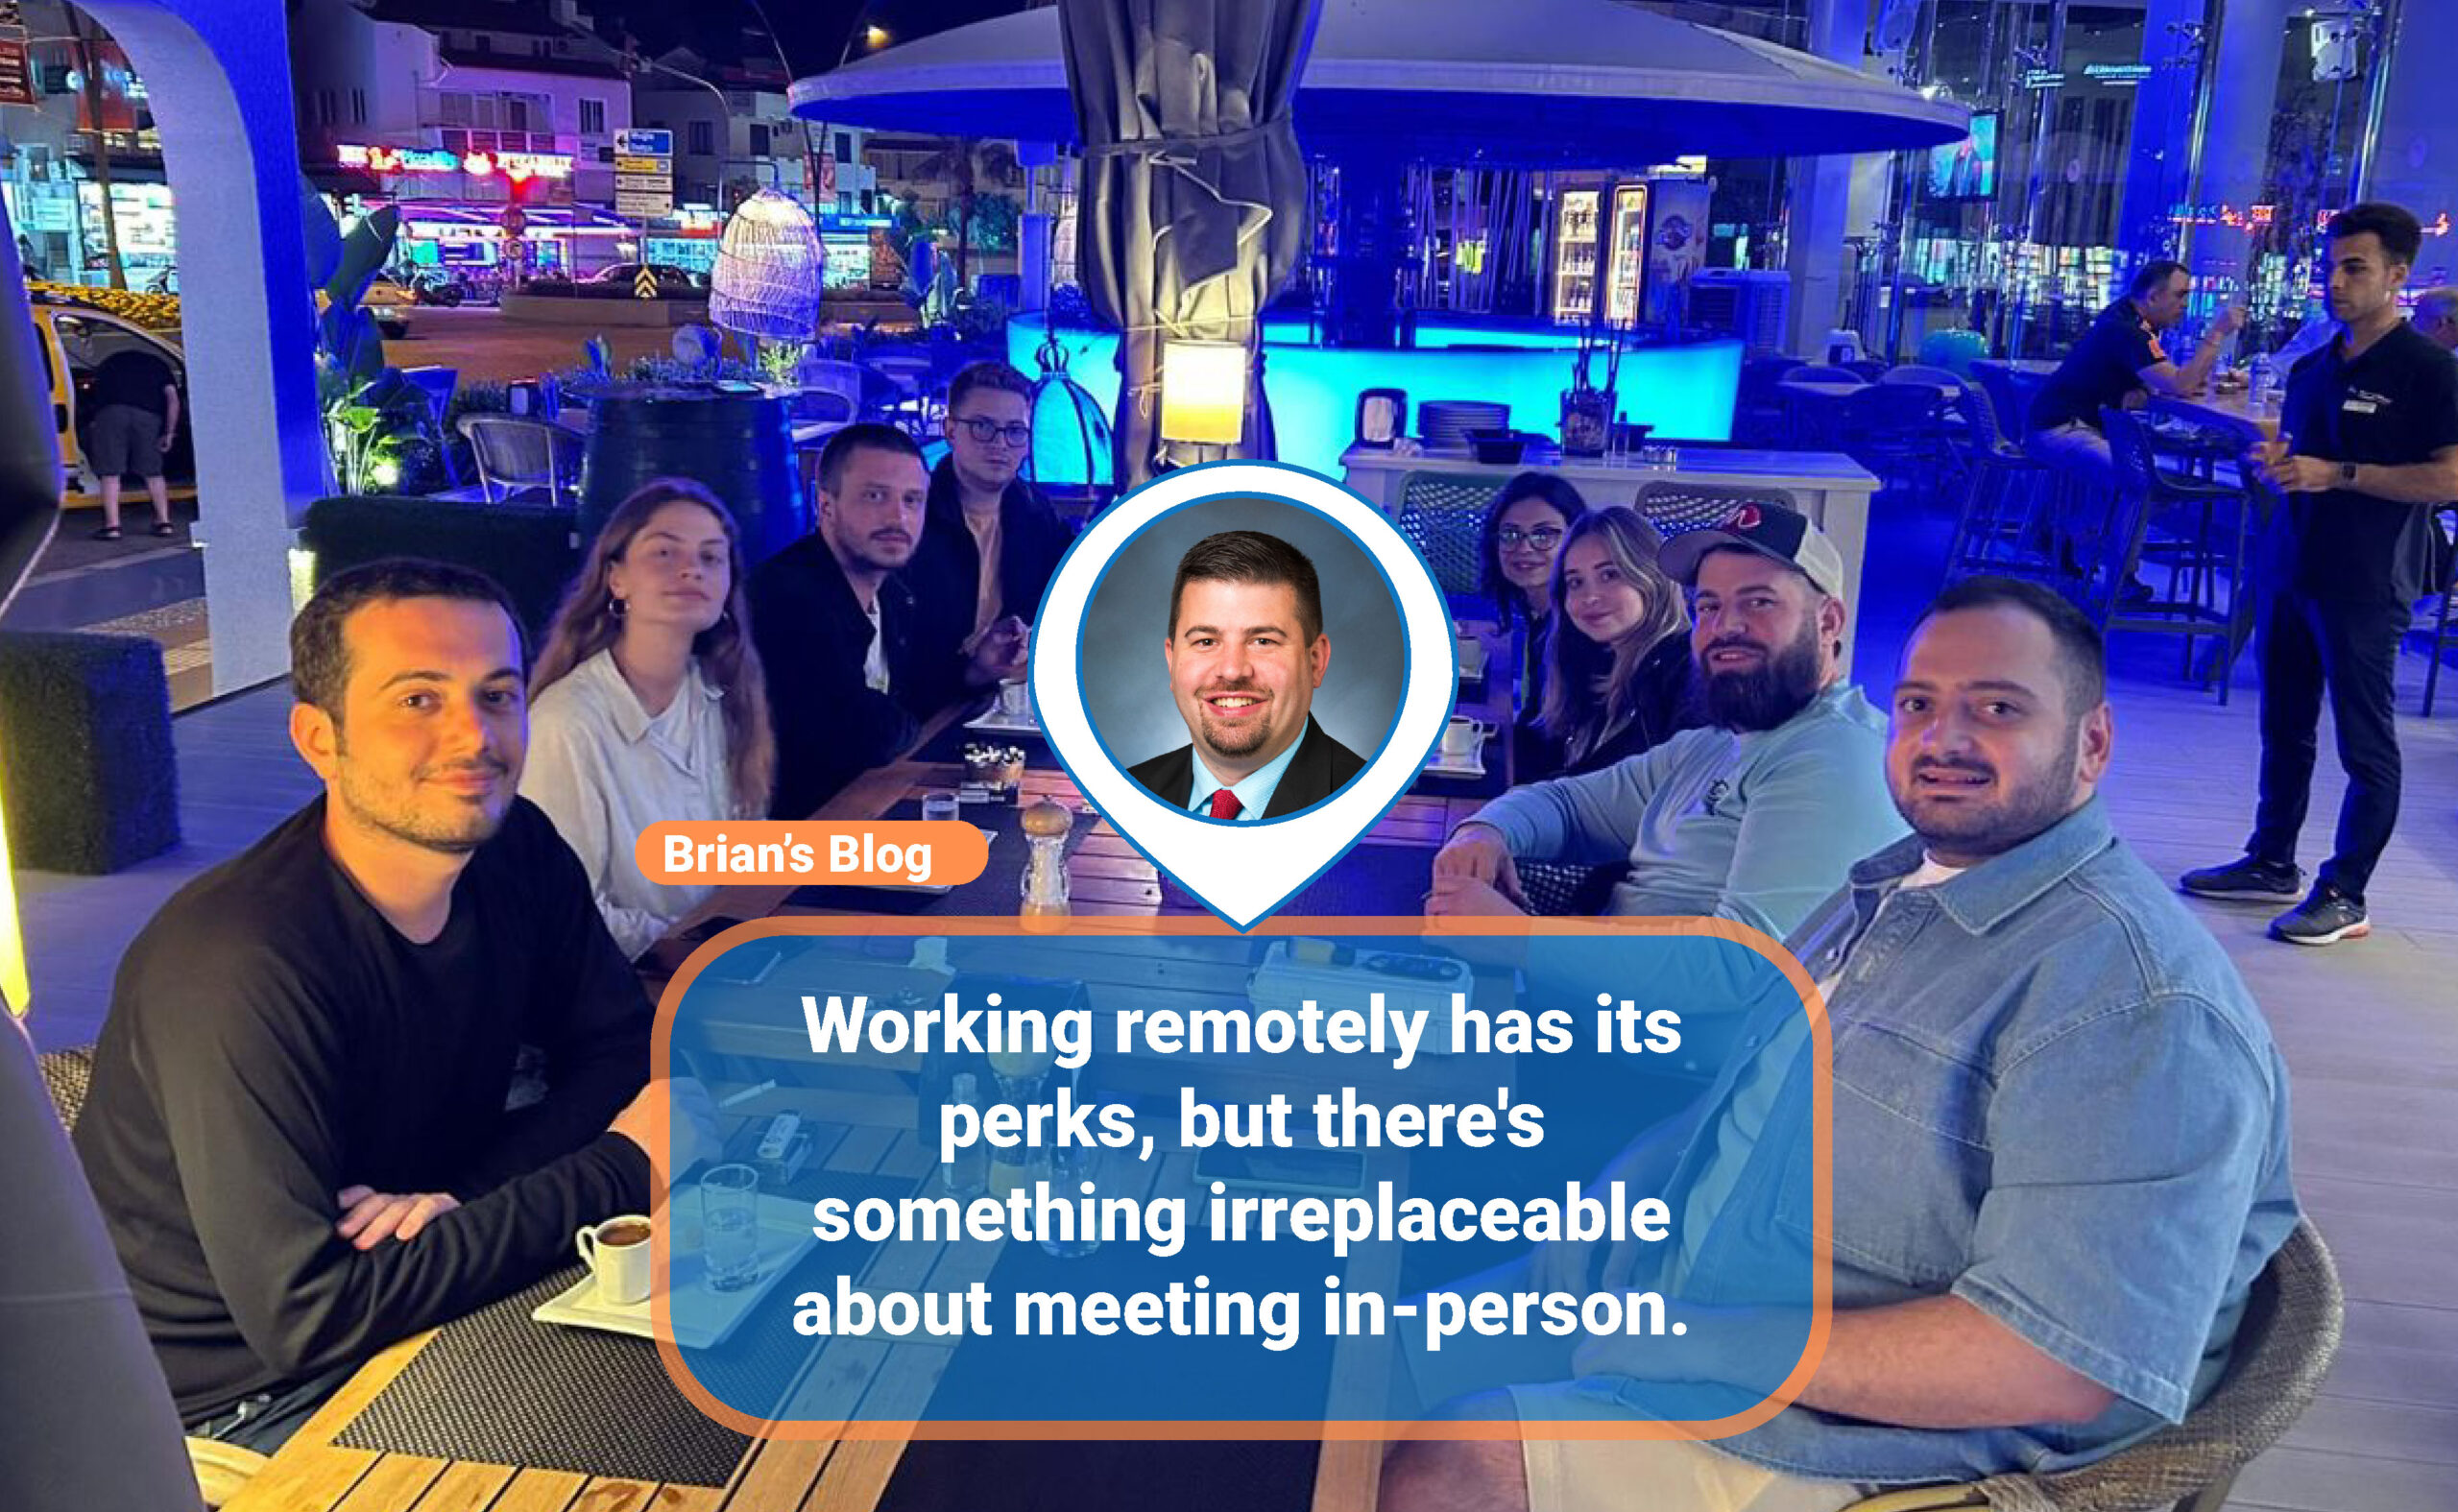 Working remotely has its perks, but there’s something irreplaceable about meeting in-person.